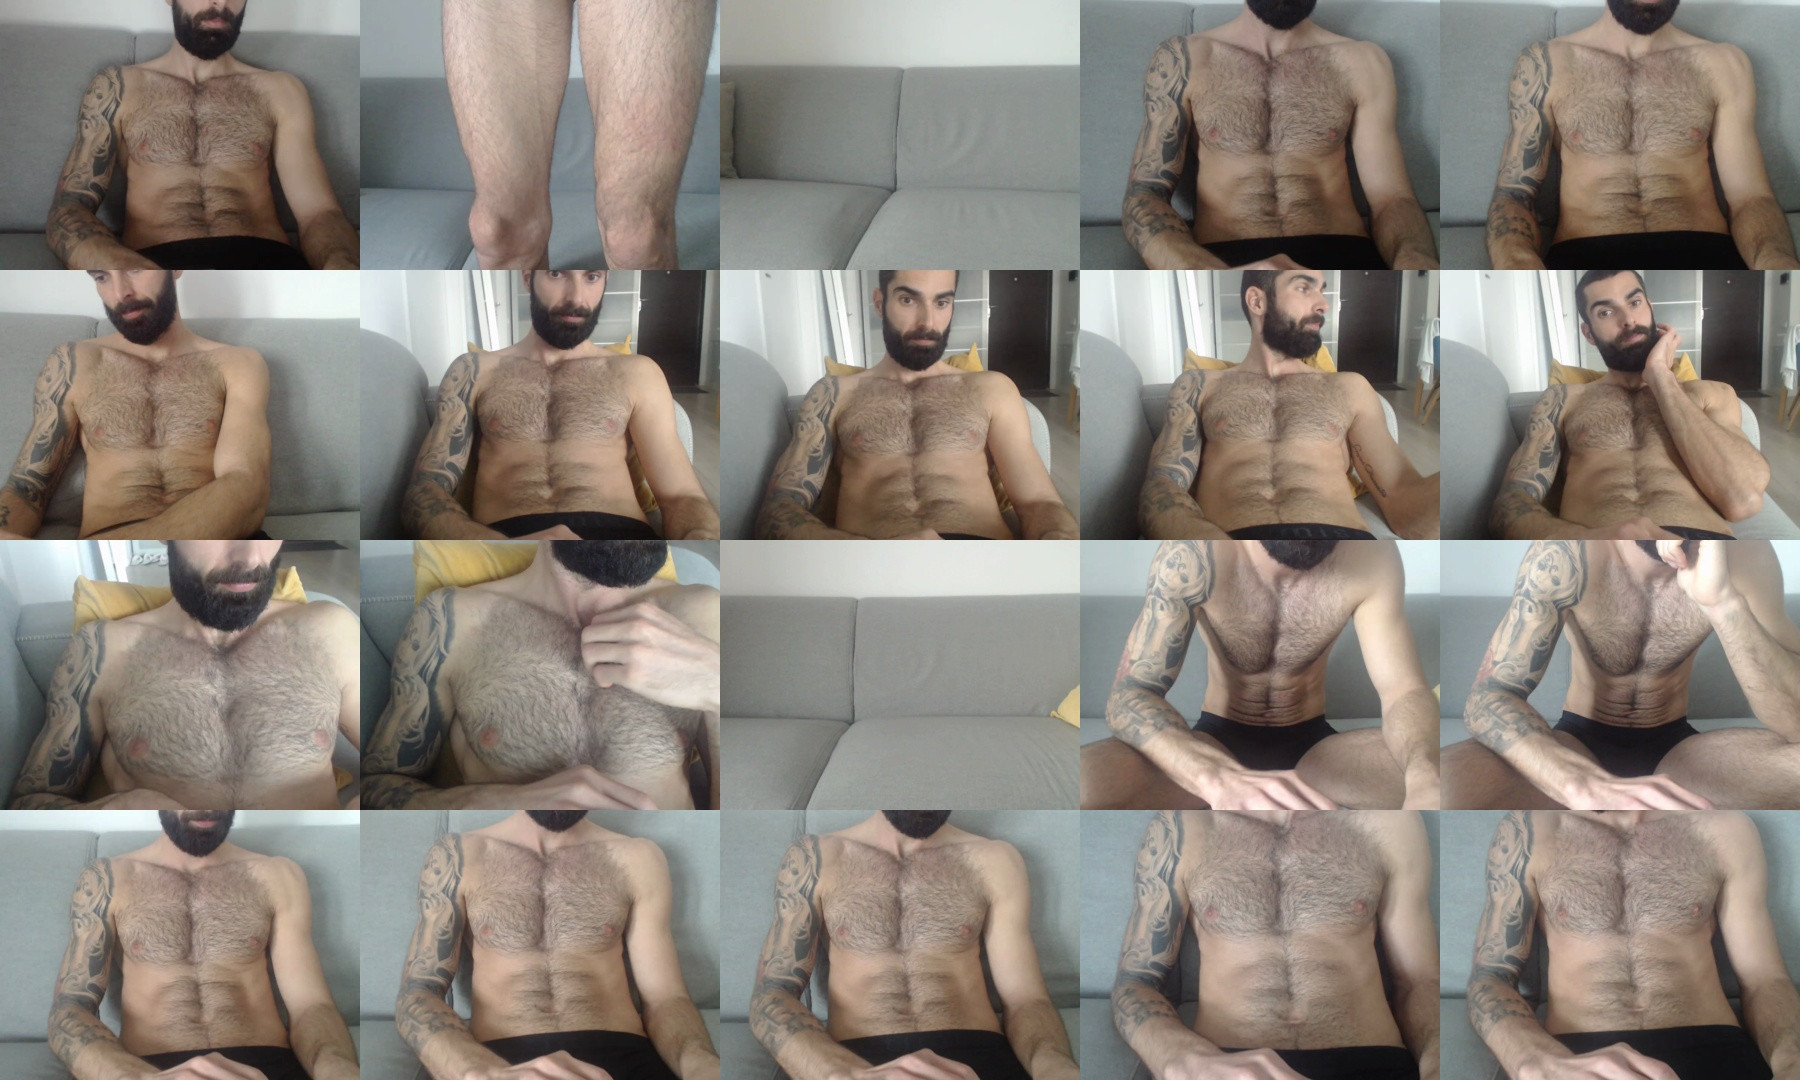 _jack7  13-03-2021 Recorded Video Topless